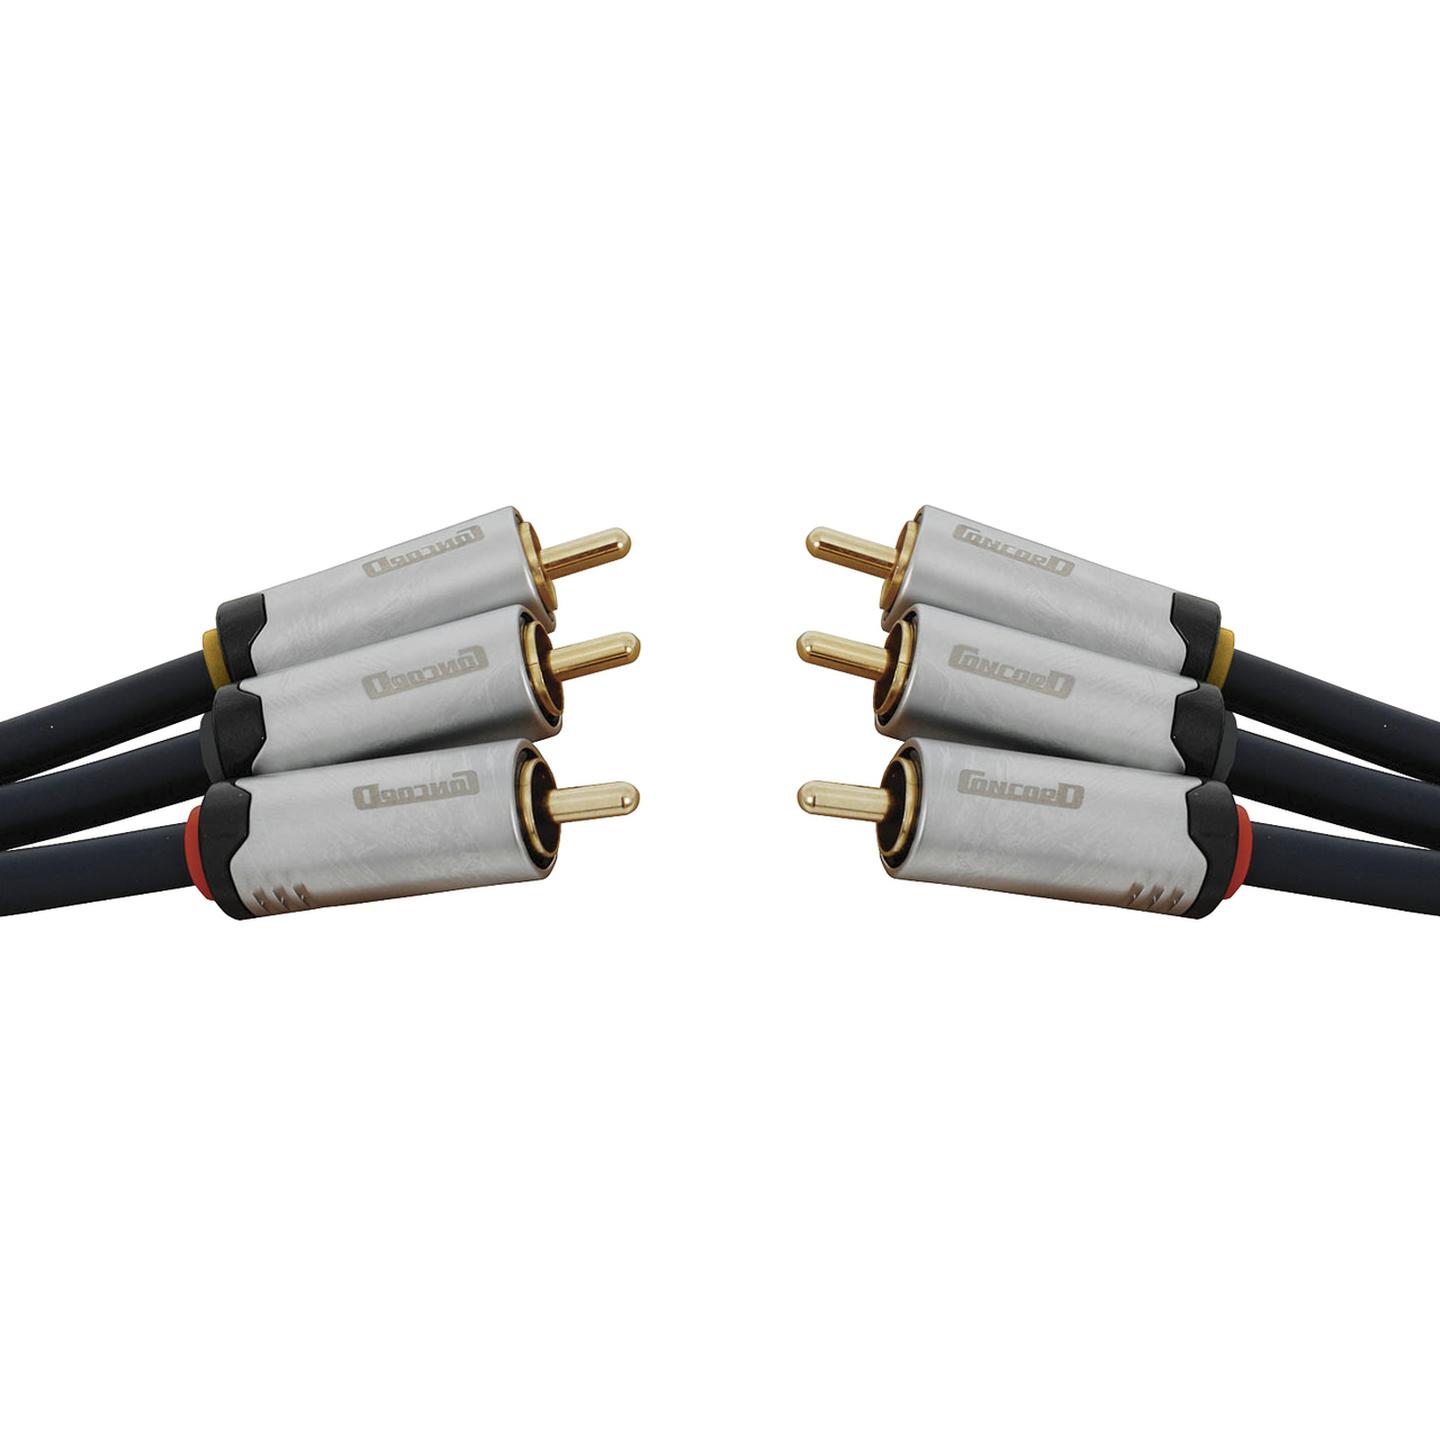 3 x RCA Plugs to 3 x RCA Plugs Cable HQ- 3m